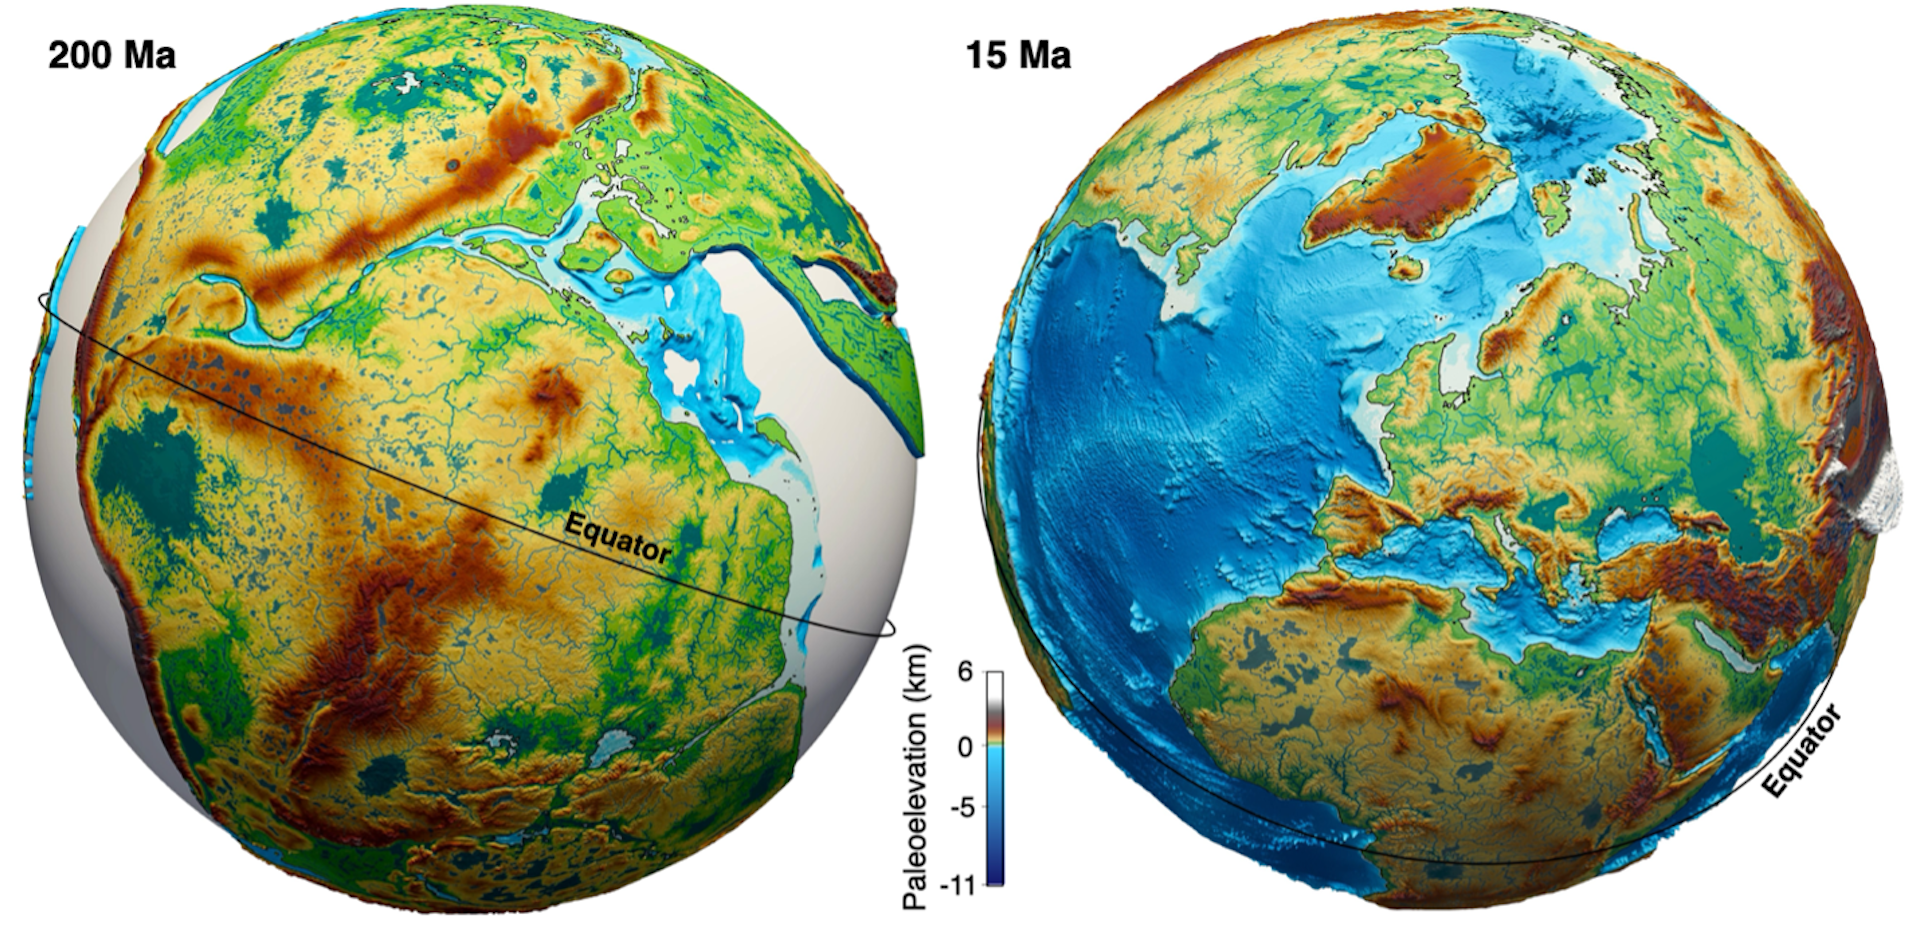 Past Landscapes Shaped Earth's Diverse Life through a New Unified Theory